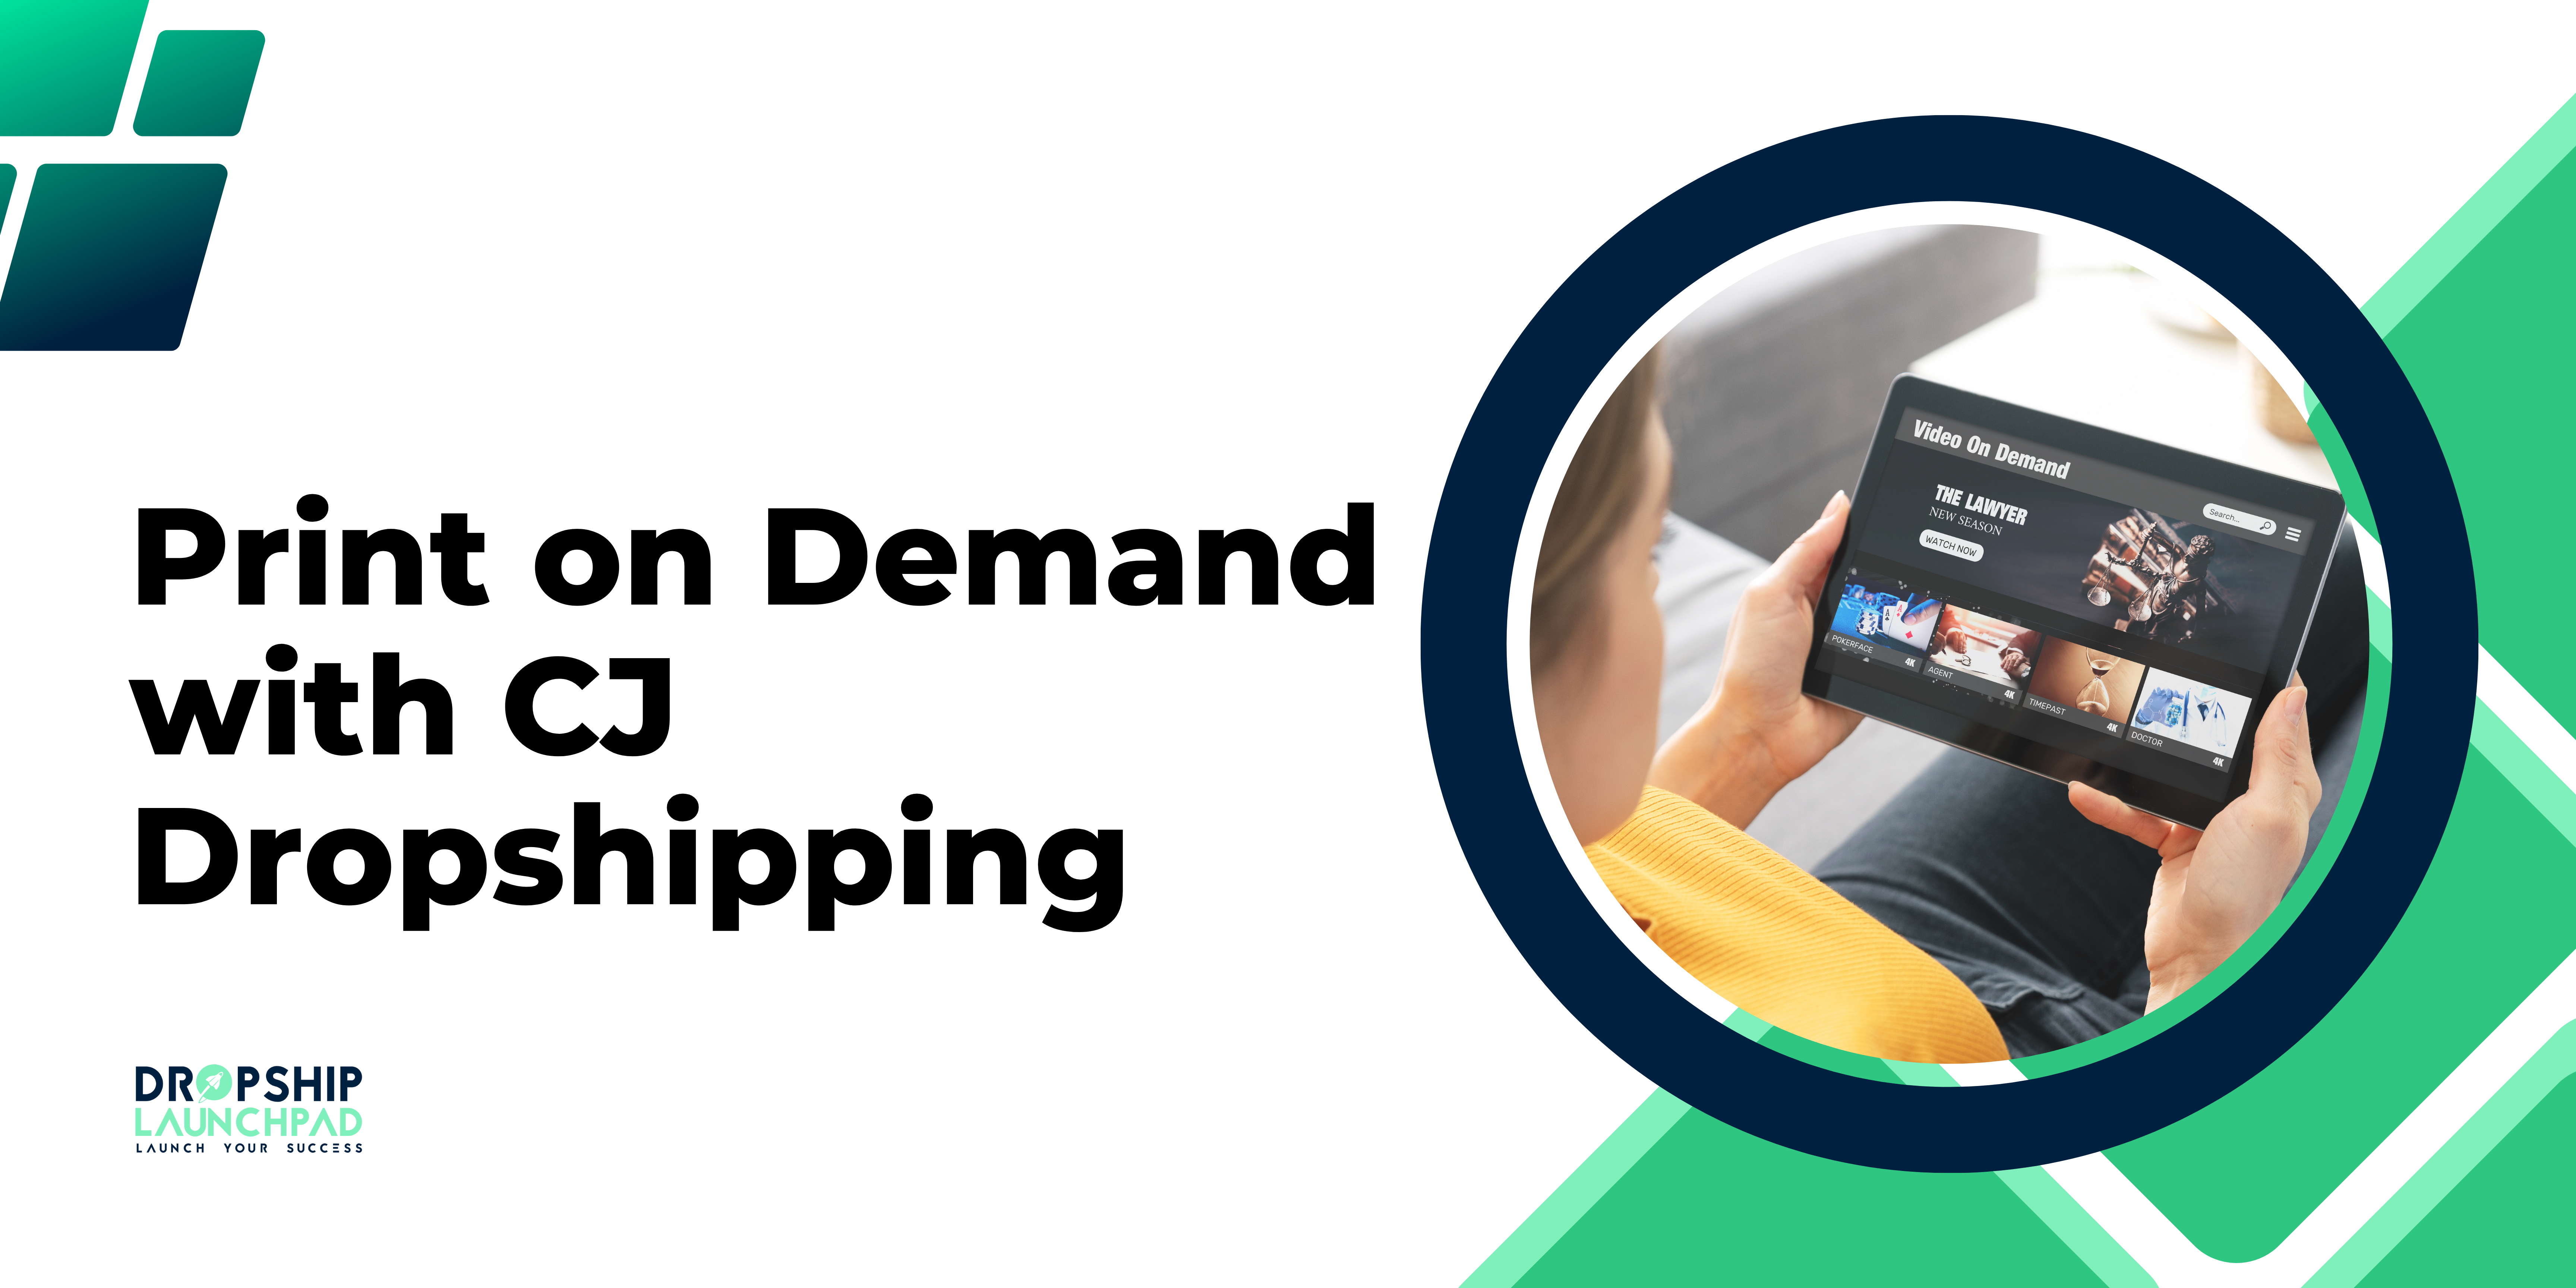 Print on Demand with CJ Dropshipping